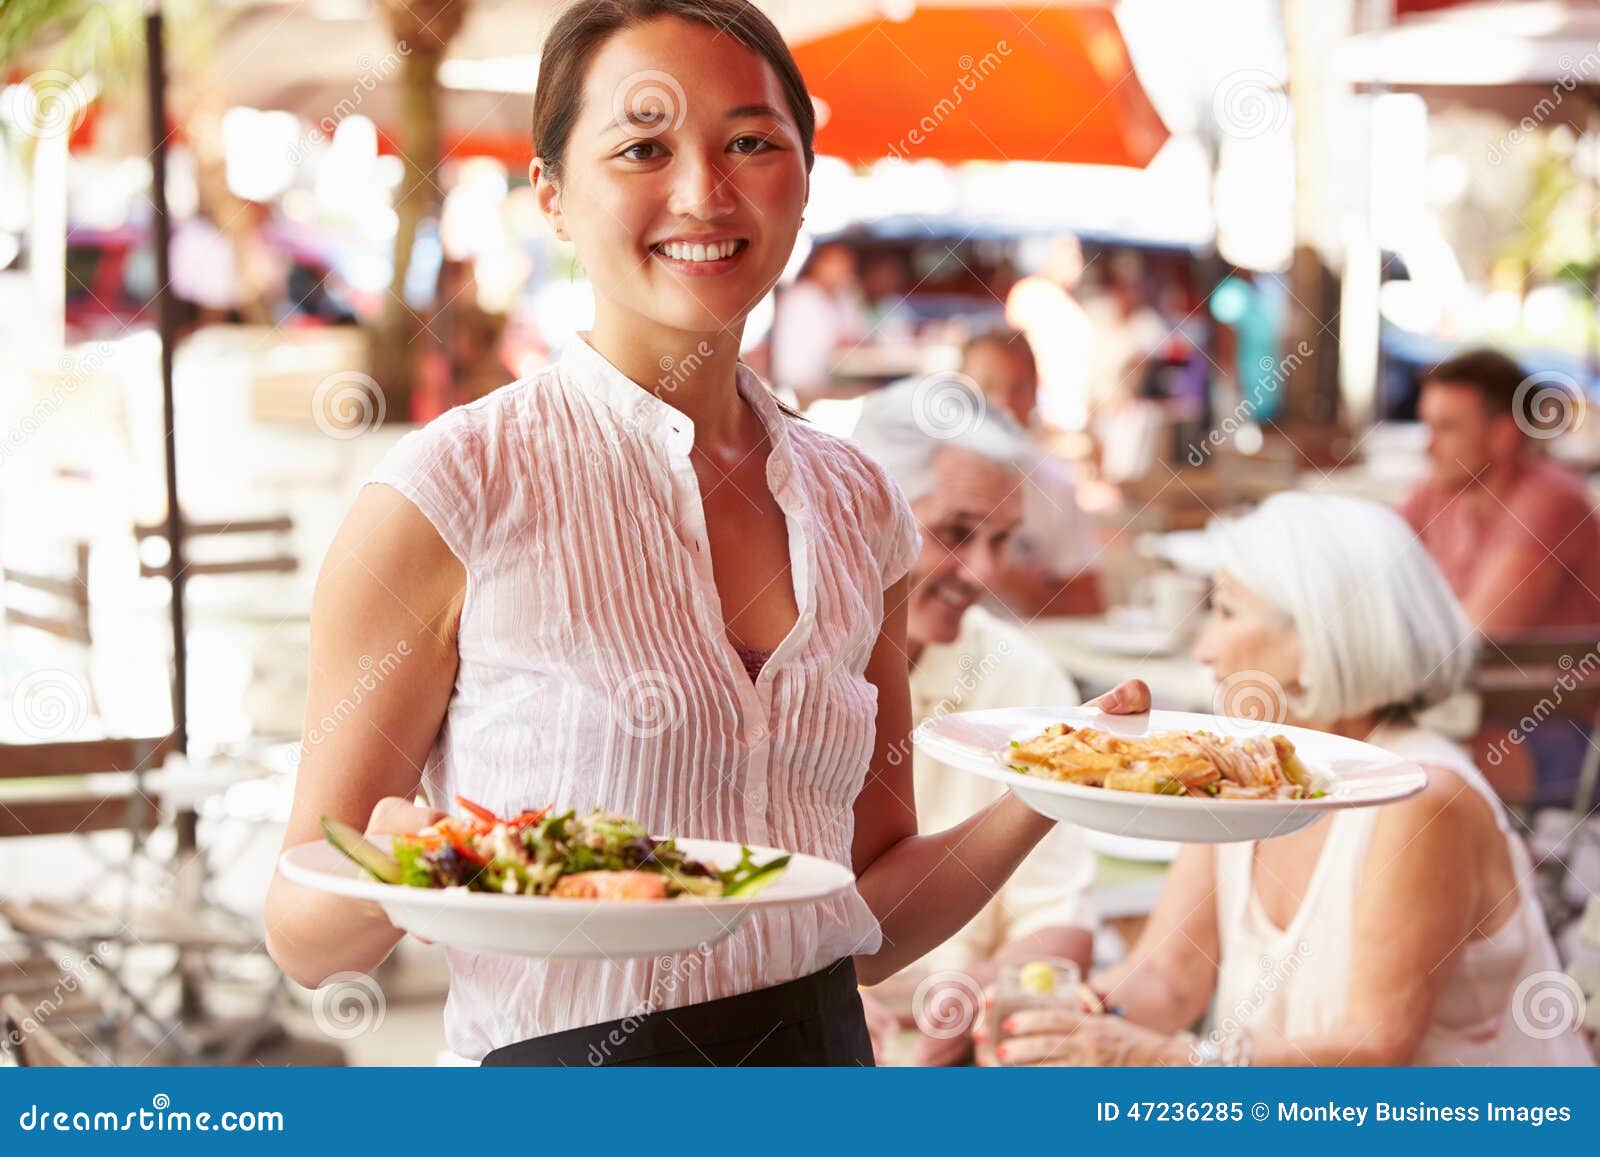  A smiling waitress wearing a white shirt and black apron carries two plates of food to customers sitting at a table outside a restaurant.